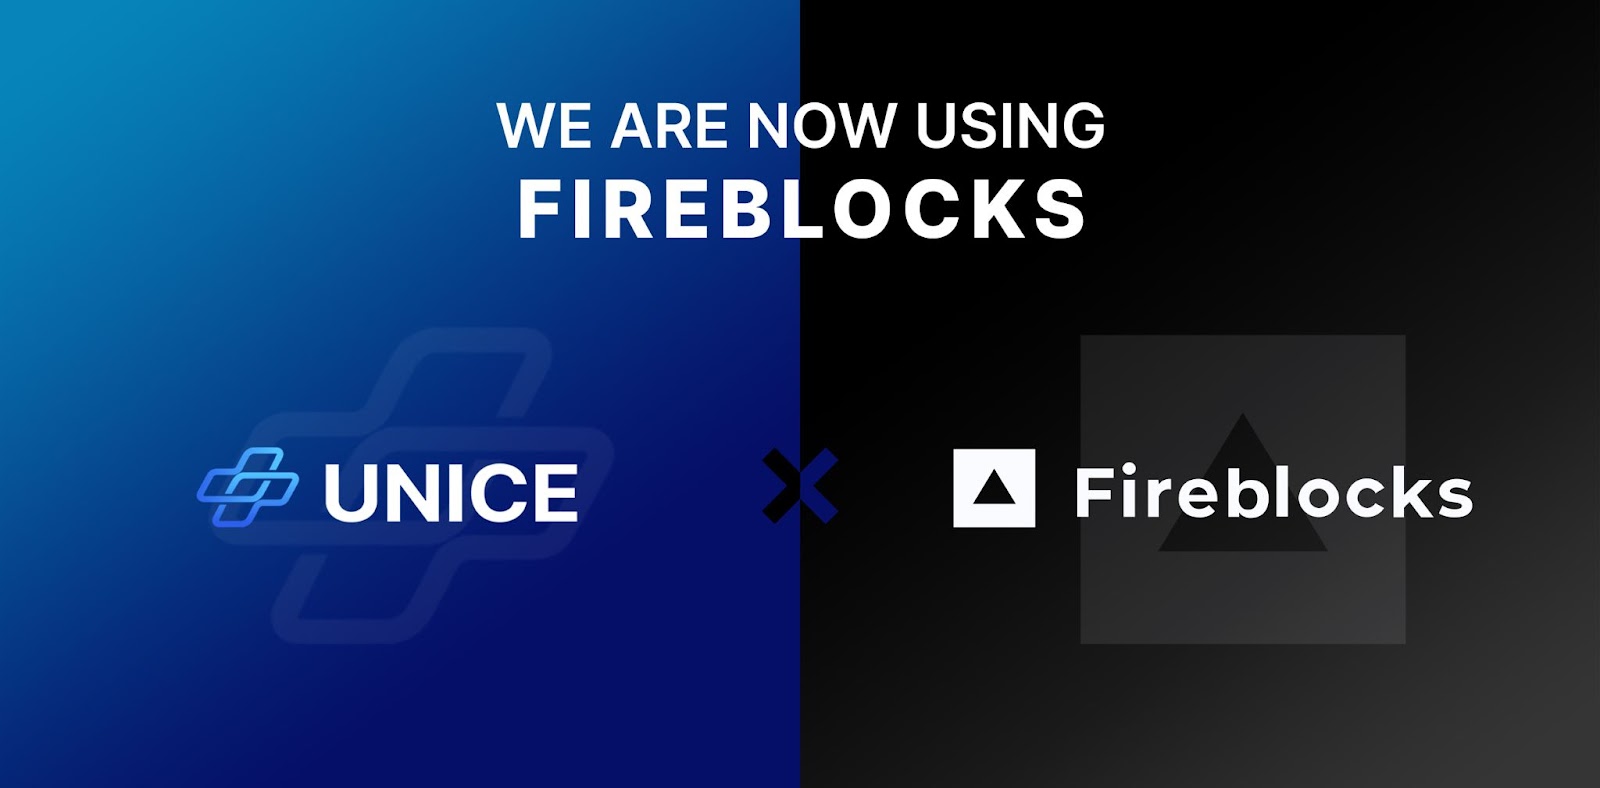 UNICE – The First AI Doctor Leverages Fireblocks for Safe Digital Asset Transfers